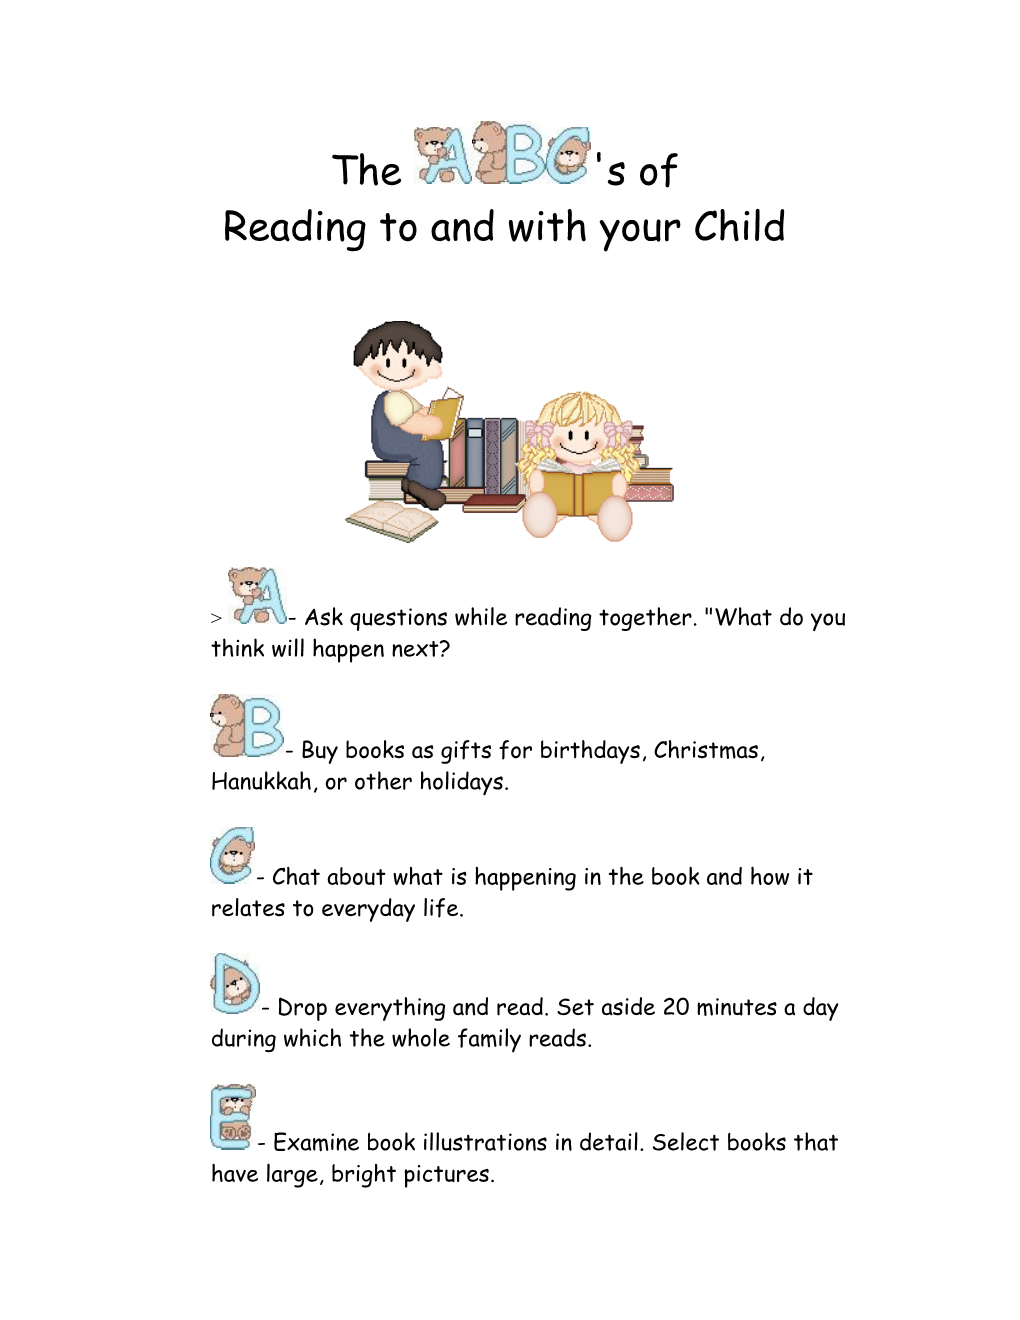 The 'S of Reading to and with Your Child